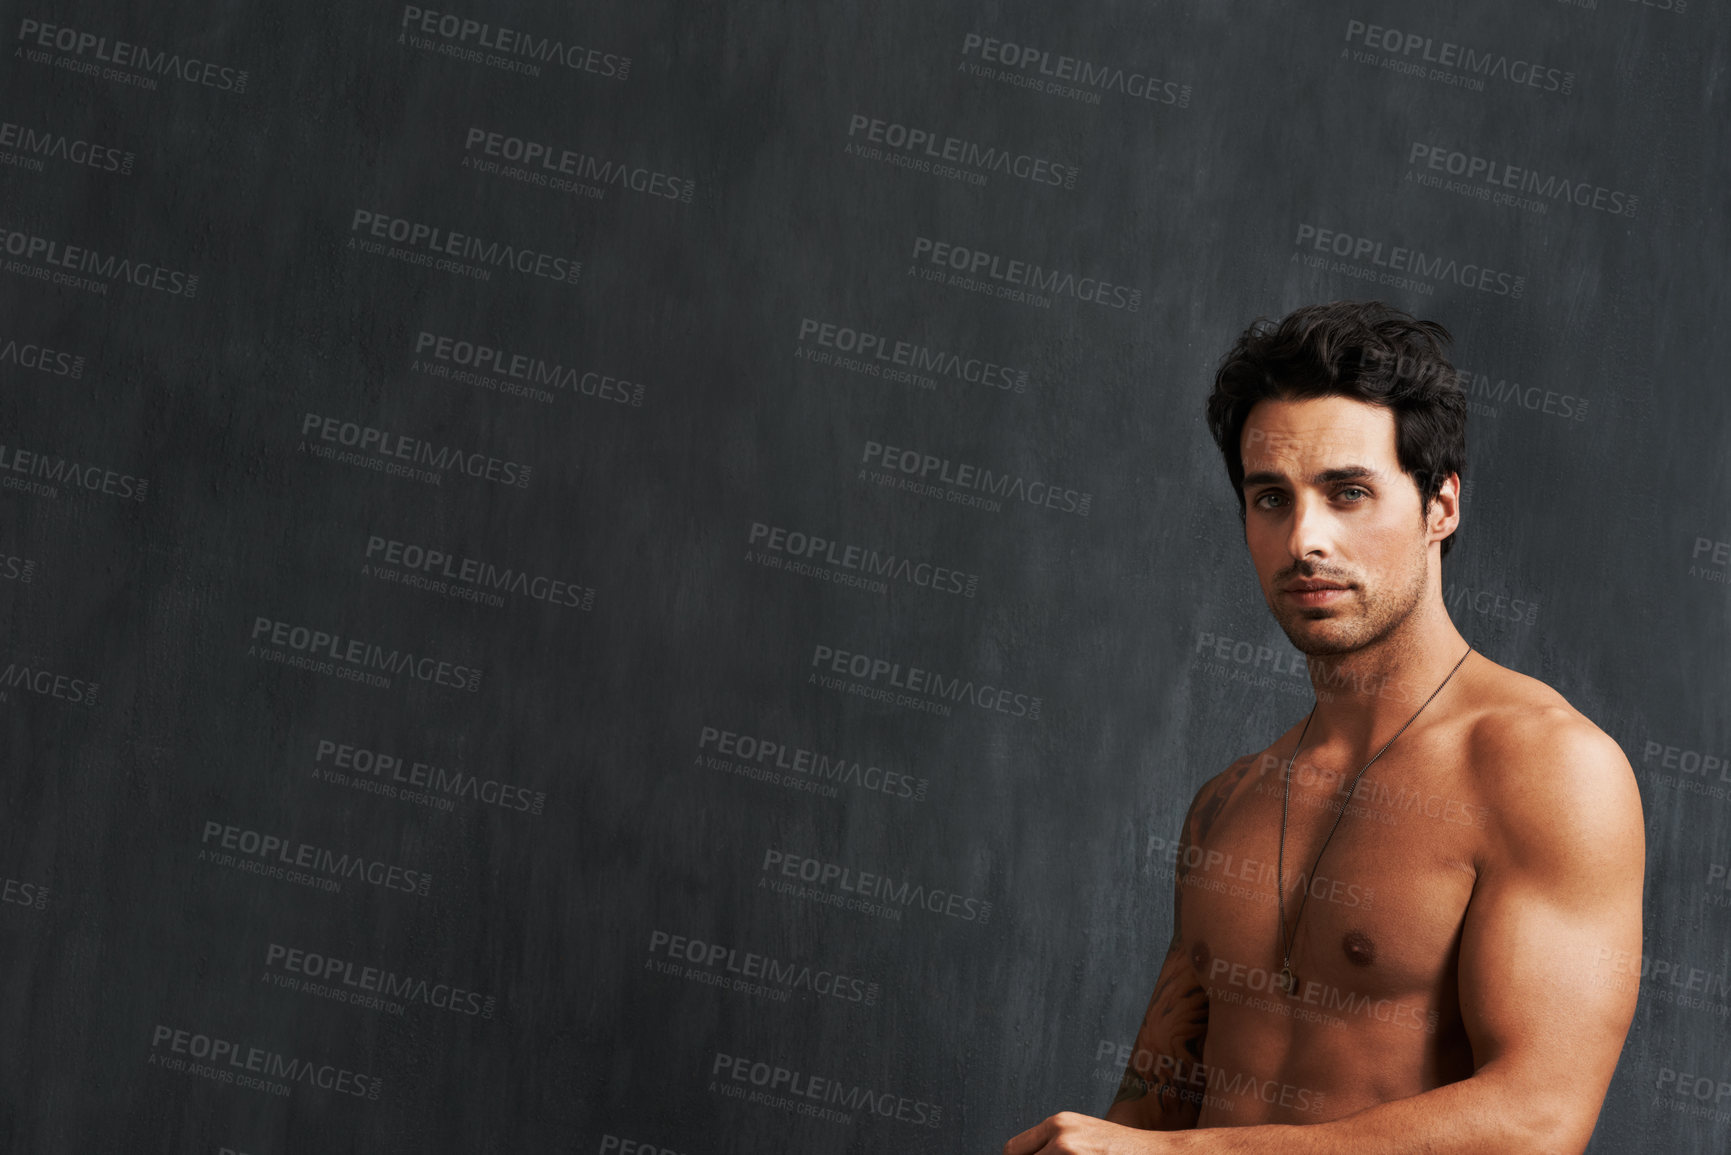 Buy stock photo Portrait, fitness model and man shirtless, strong and muscular results from strength training, body building and workout. Bodybuilder, chalkboard mockup space and studio person on black background